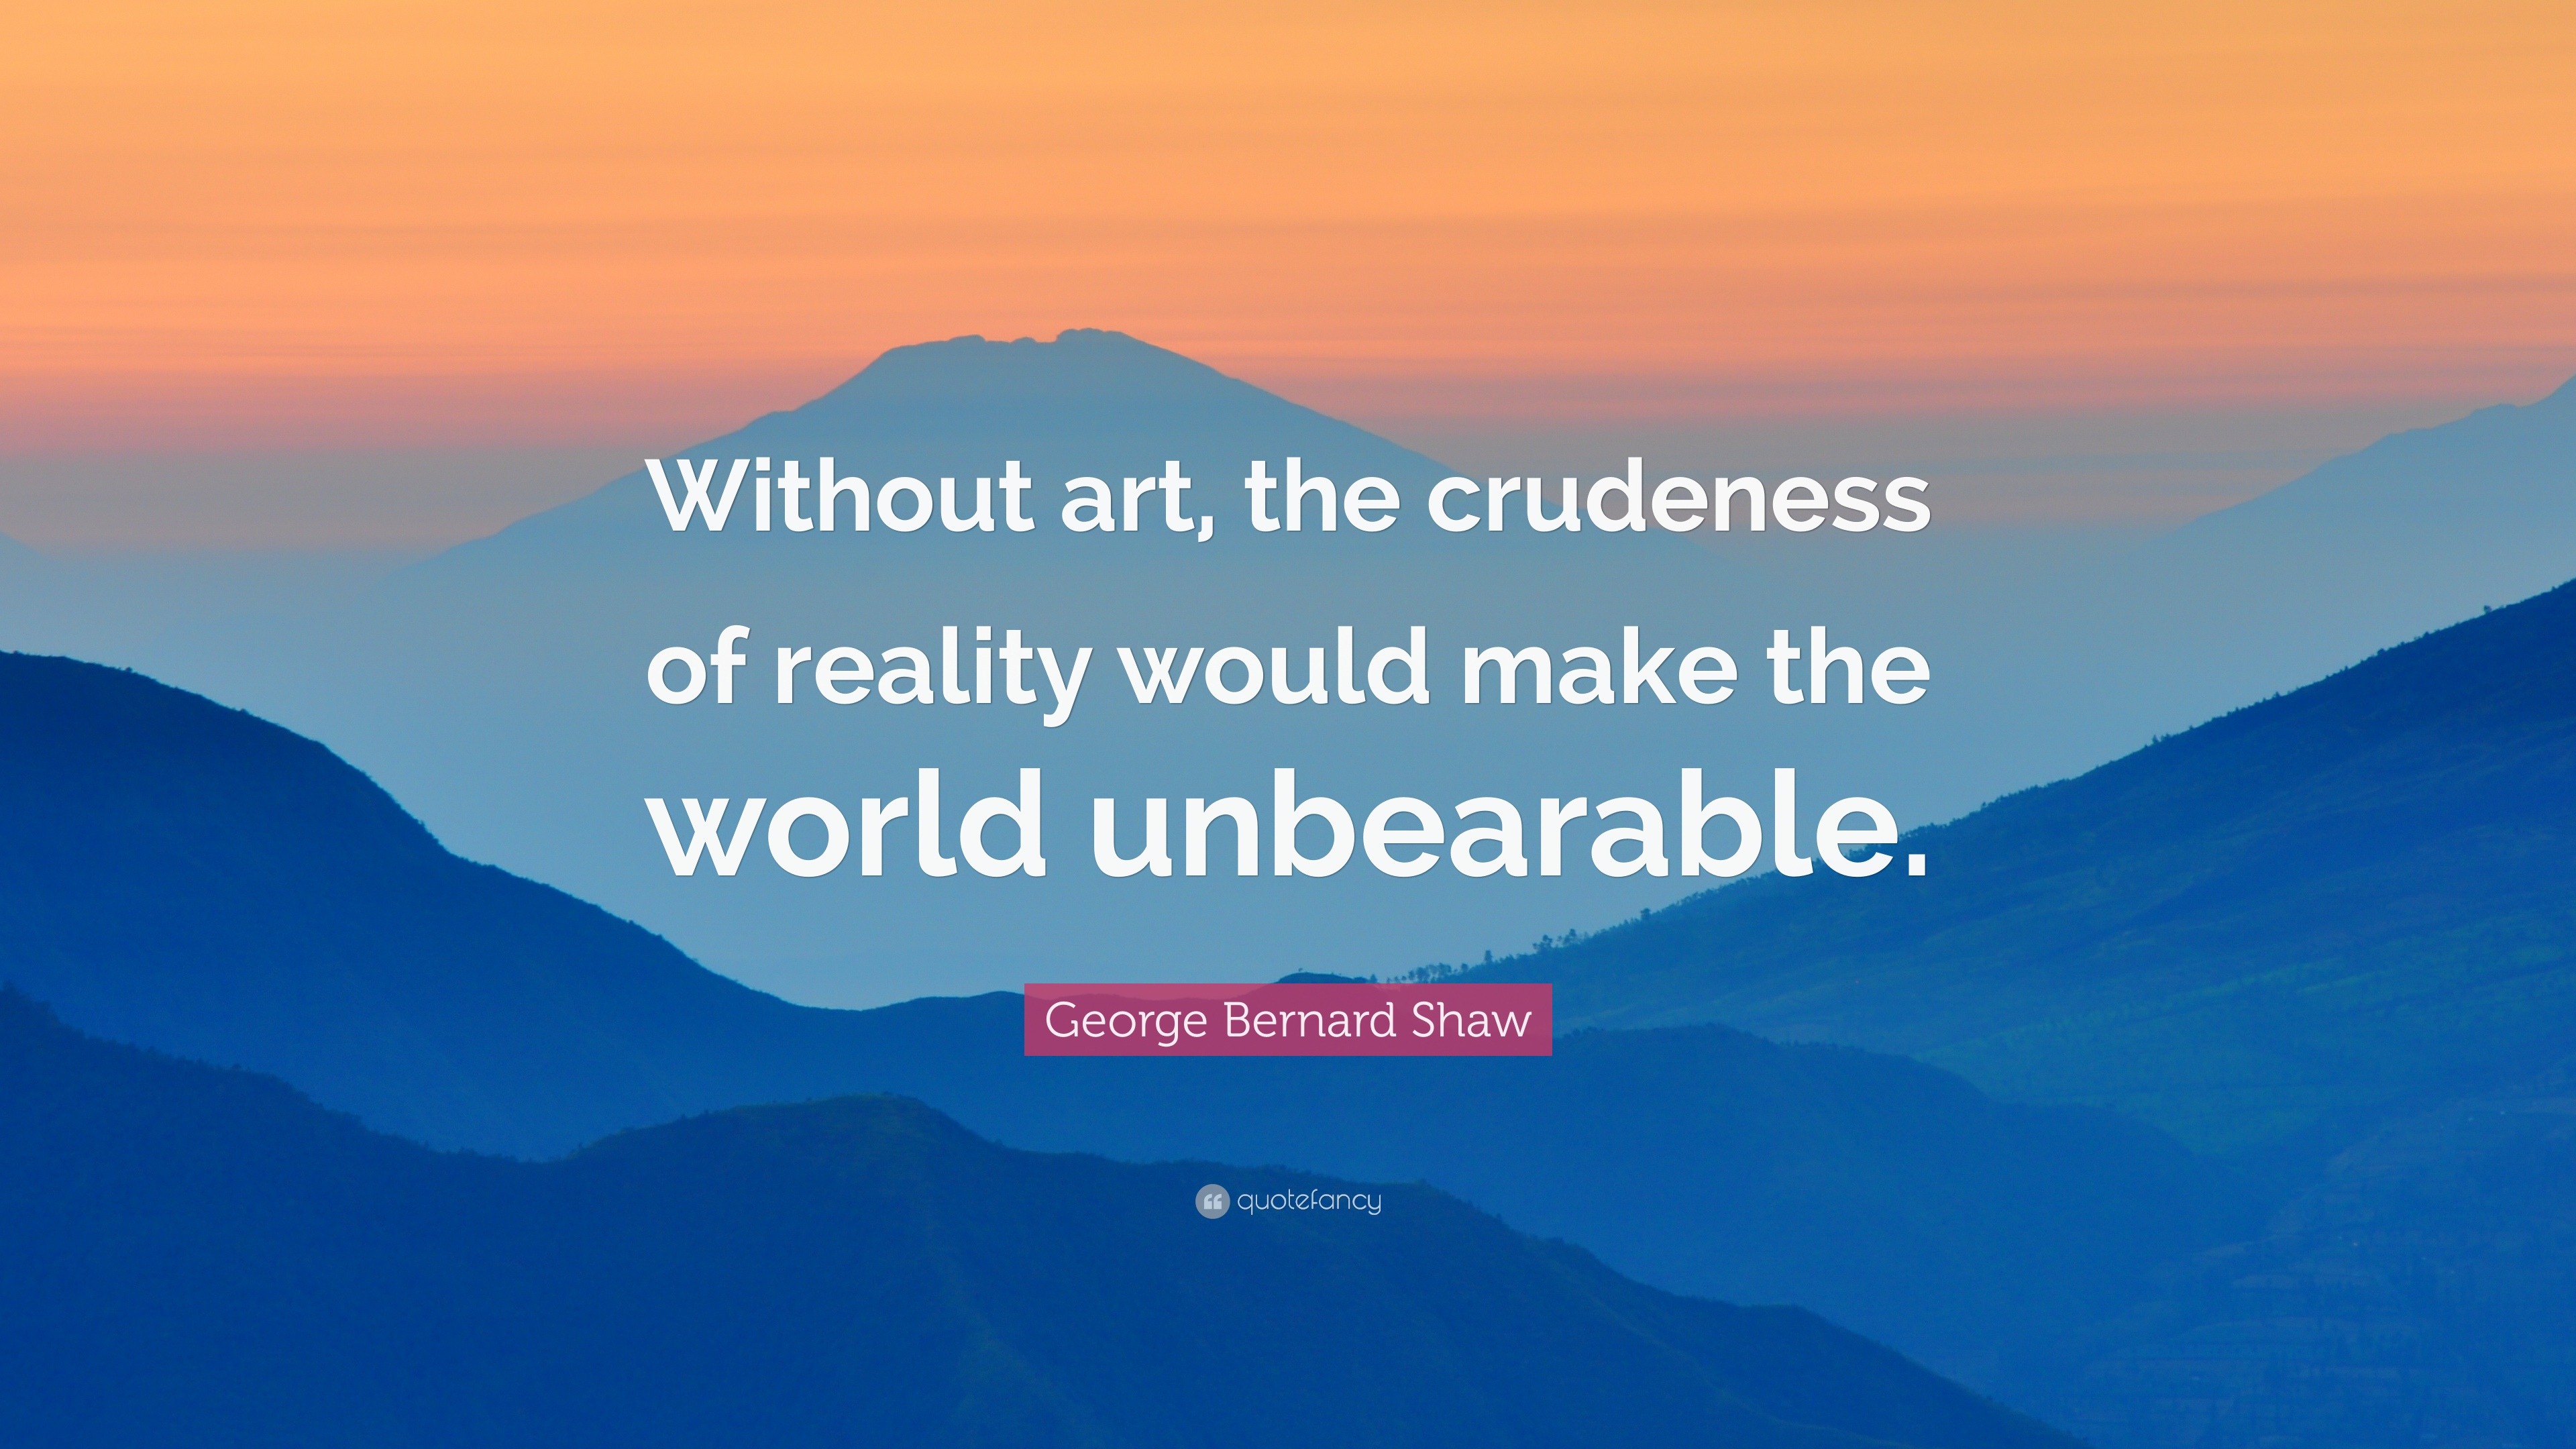 Bernard Shaw Quote “Without art, the crudeness of